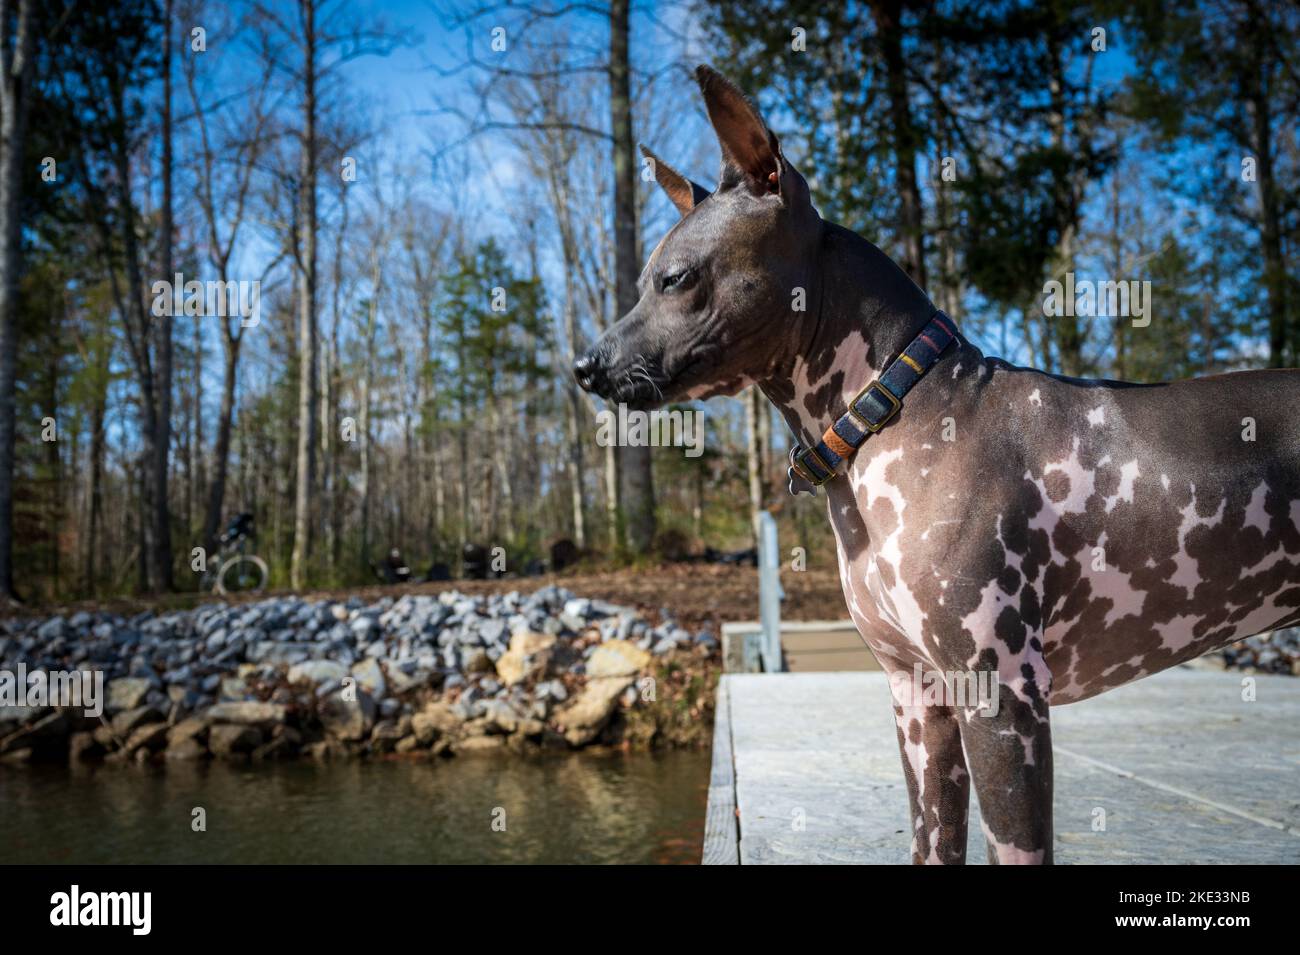 American Hairless Dog walking on a fishing deck in the Tennessee River. Taken in a cloudy day during the month of November Stock Photo